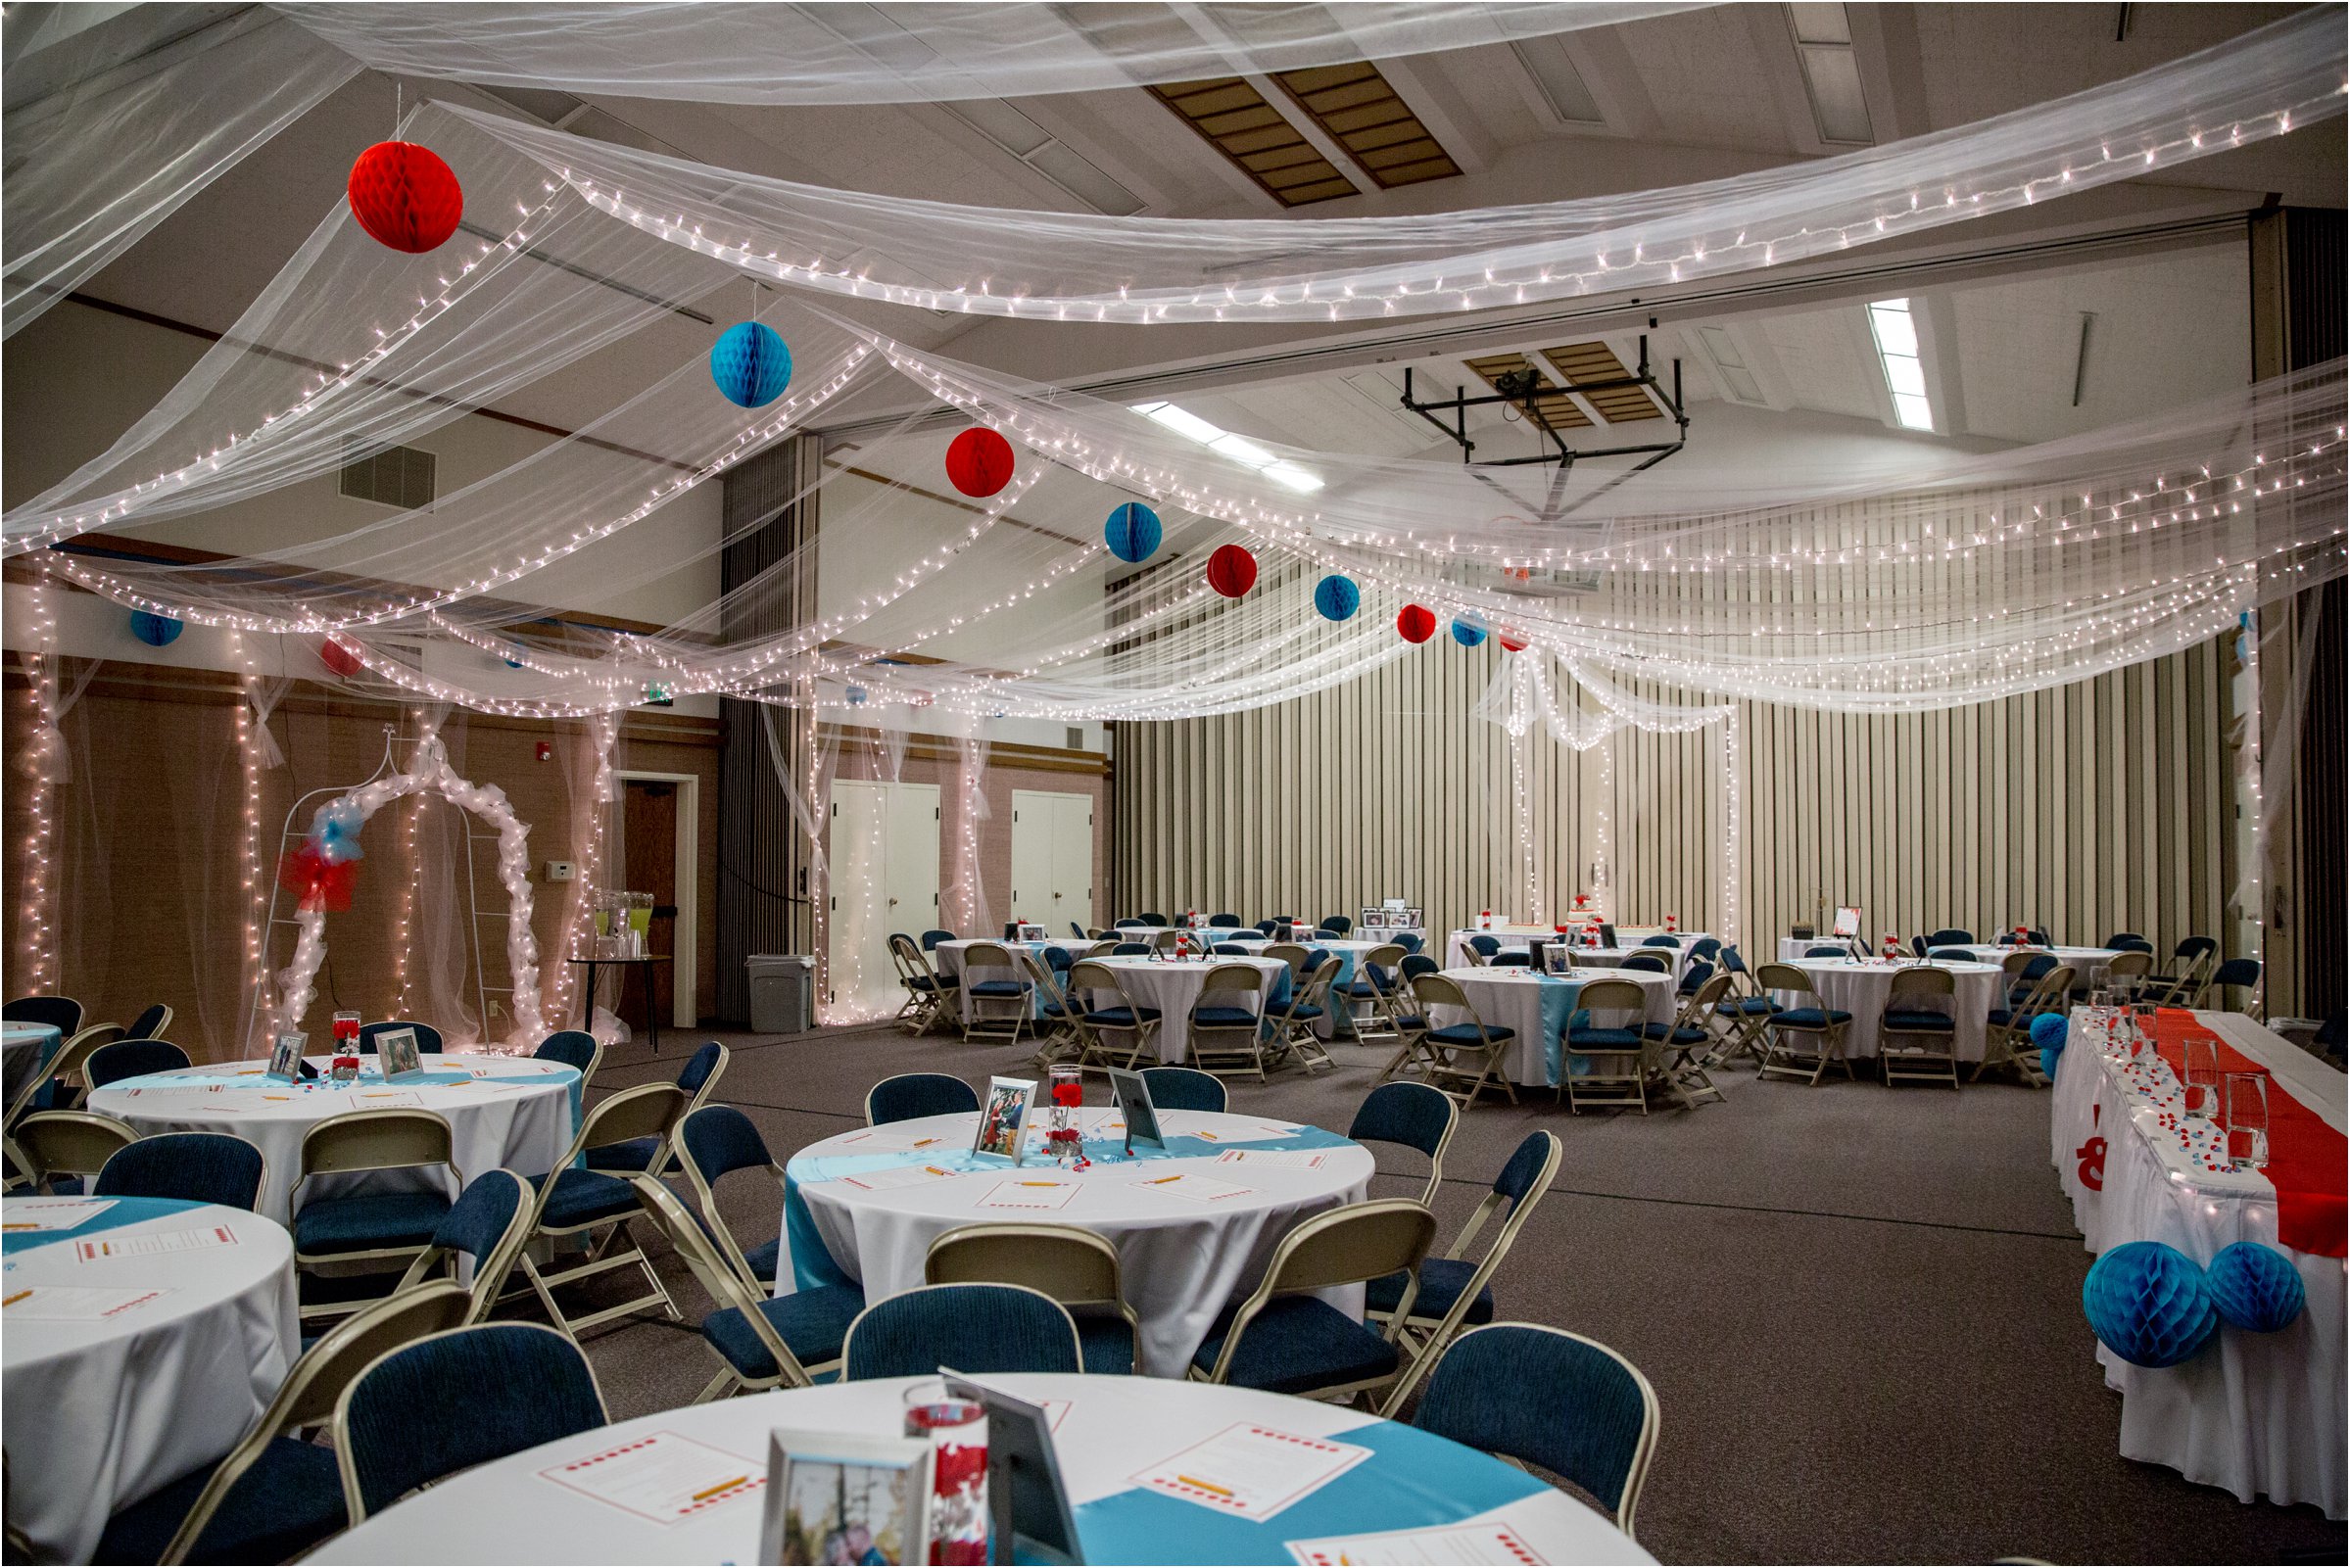 room set up for a wedding reception with red and blue accents